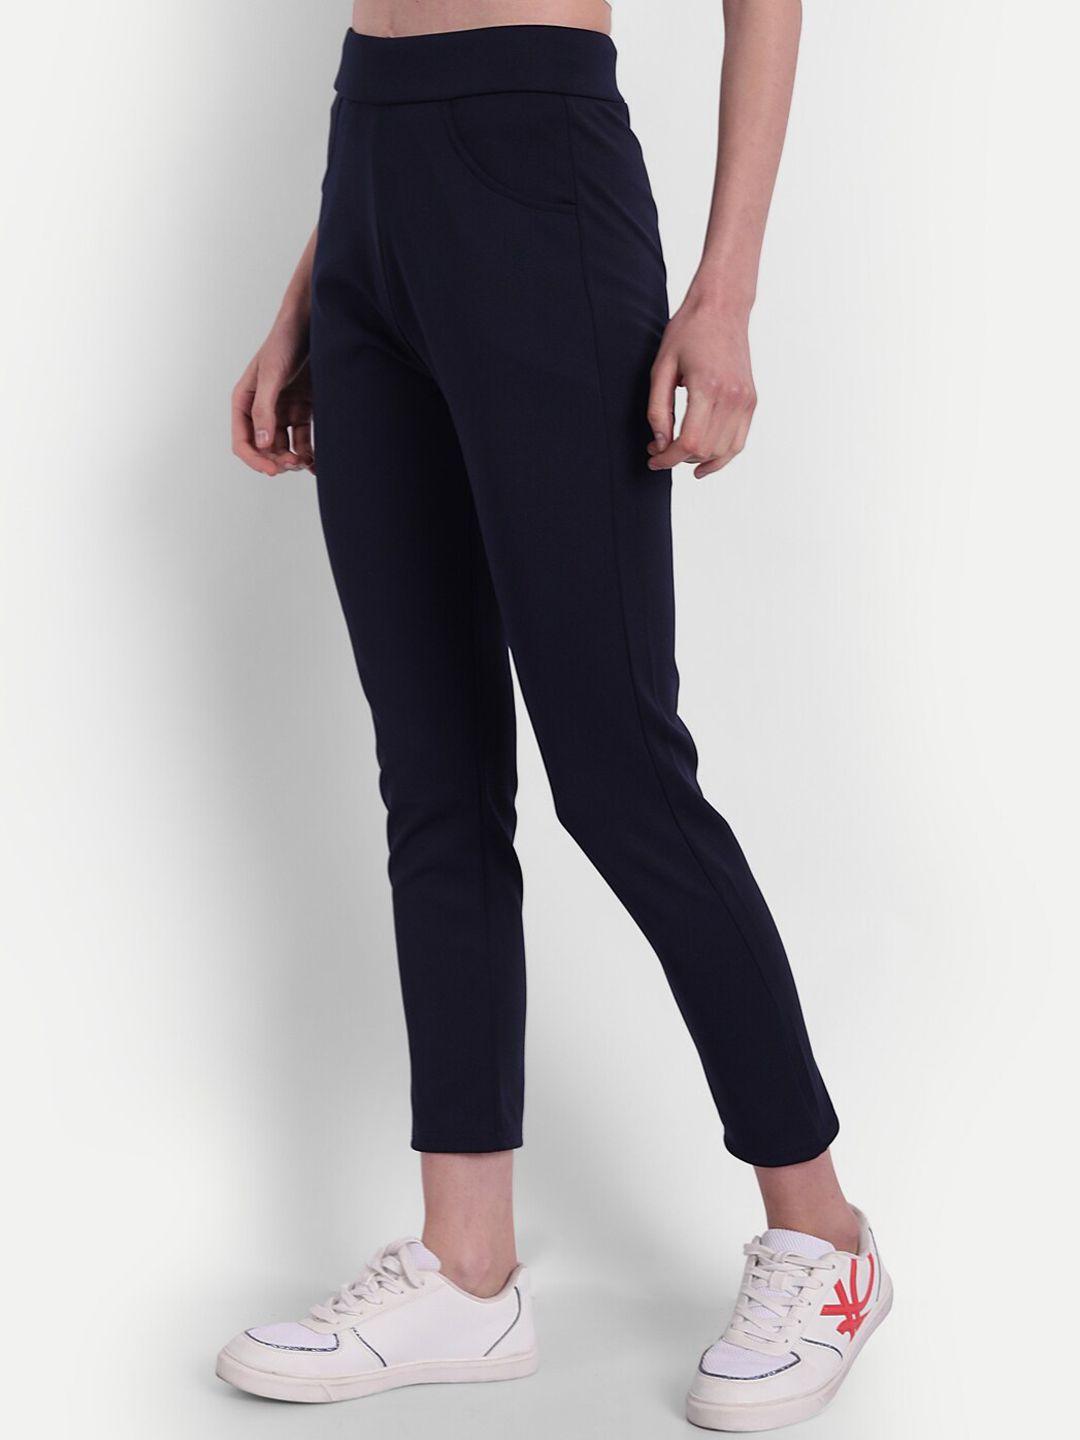 next one women stretchable slim fit training or gym track pants